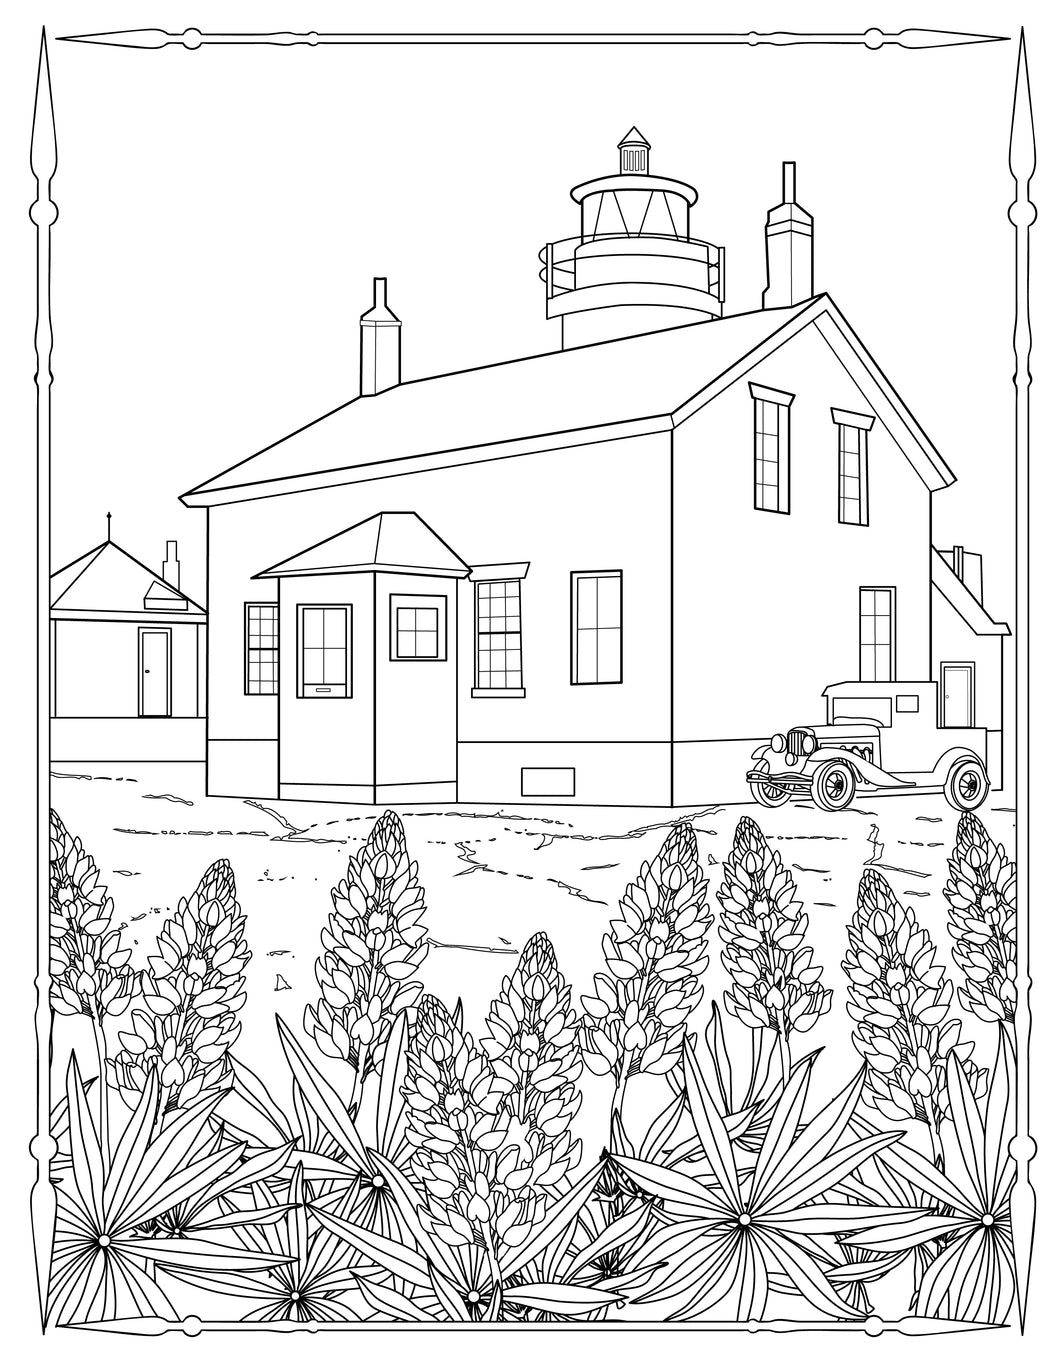 Single Coloring Book Page - Willapa Bay Lighthouse, Washington - Digital Print-from-Home